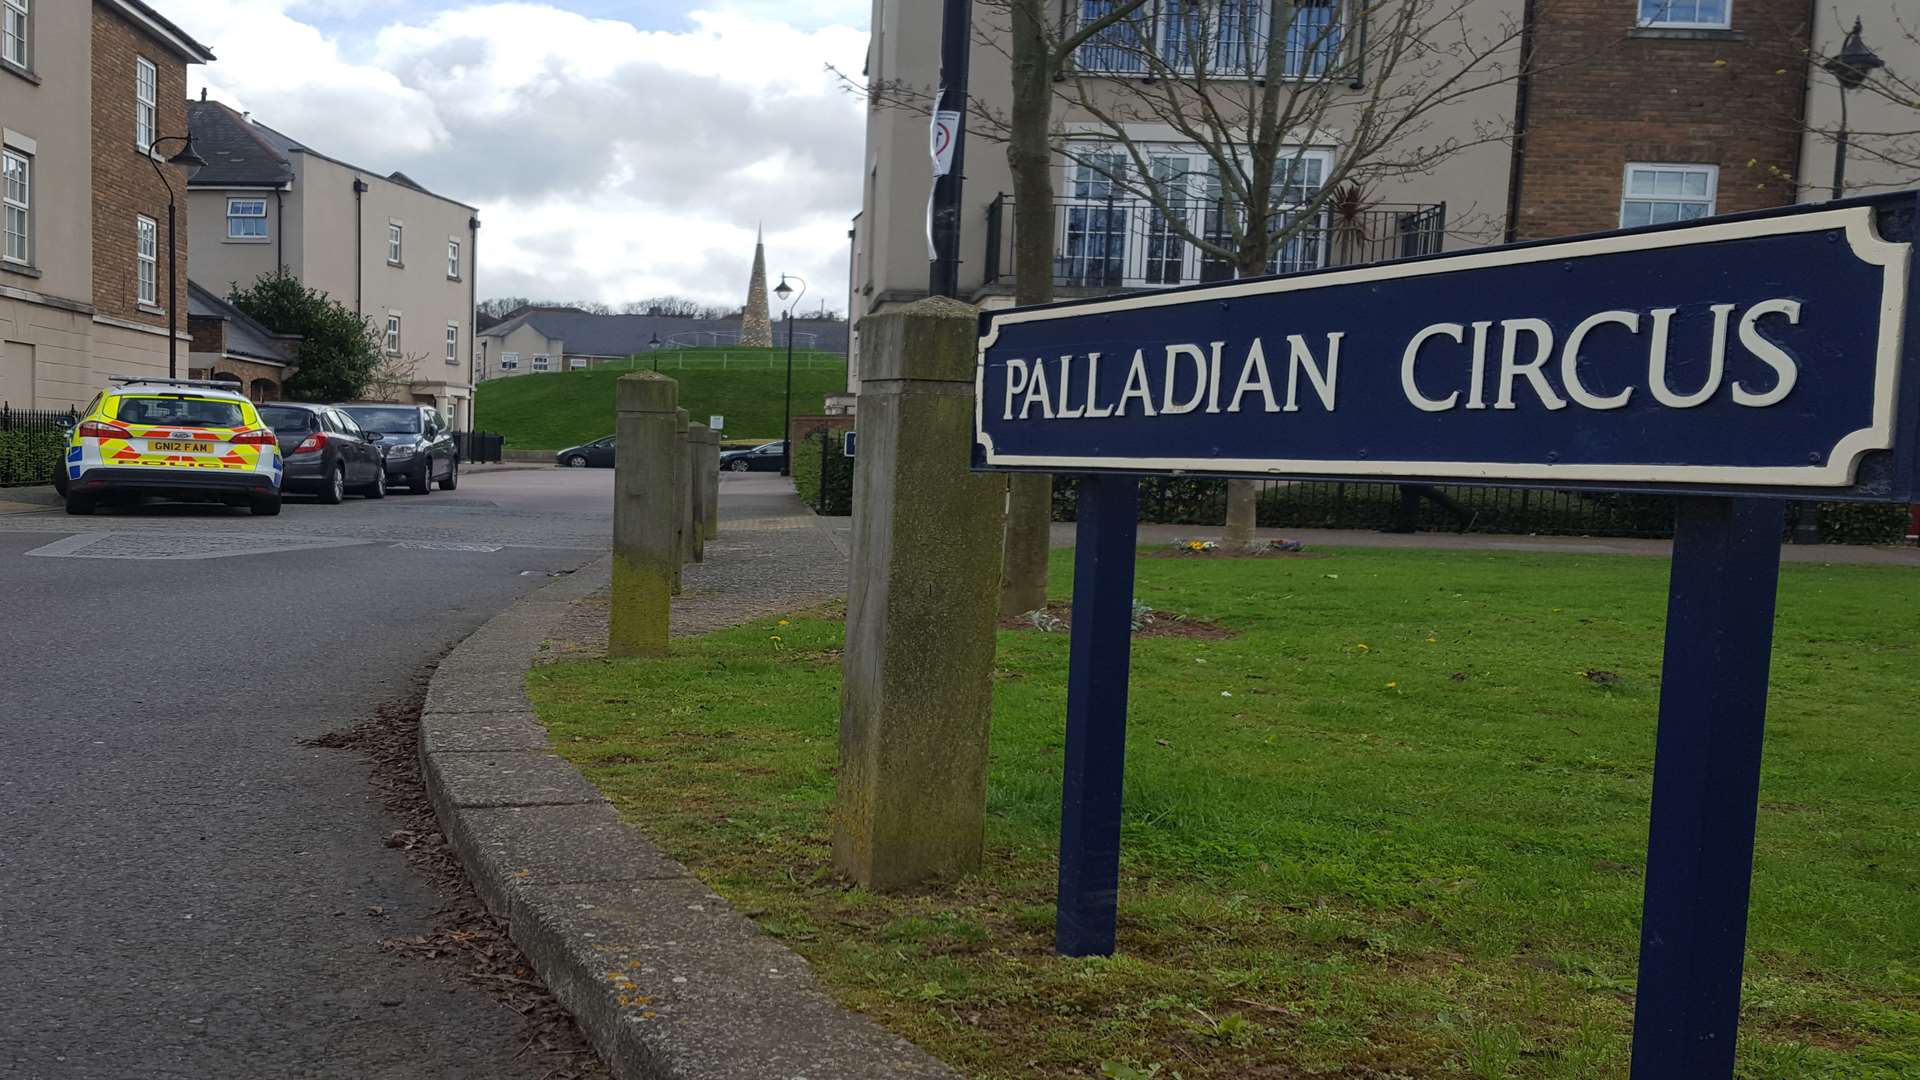 Police were called to the Palladian Circus area of Greenhithe